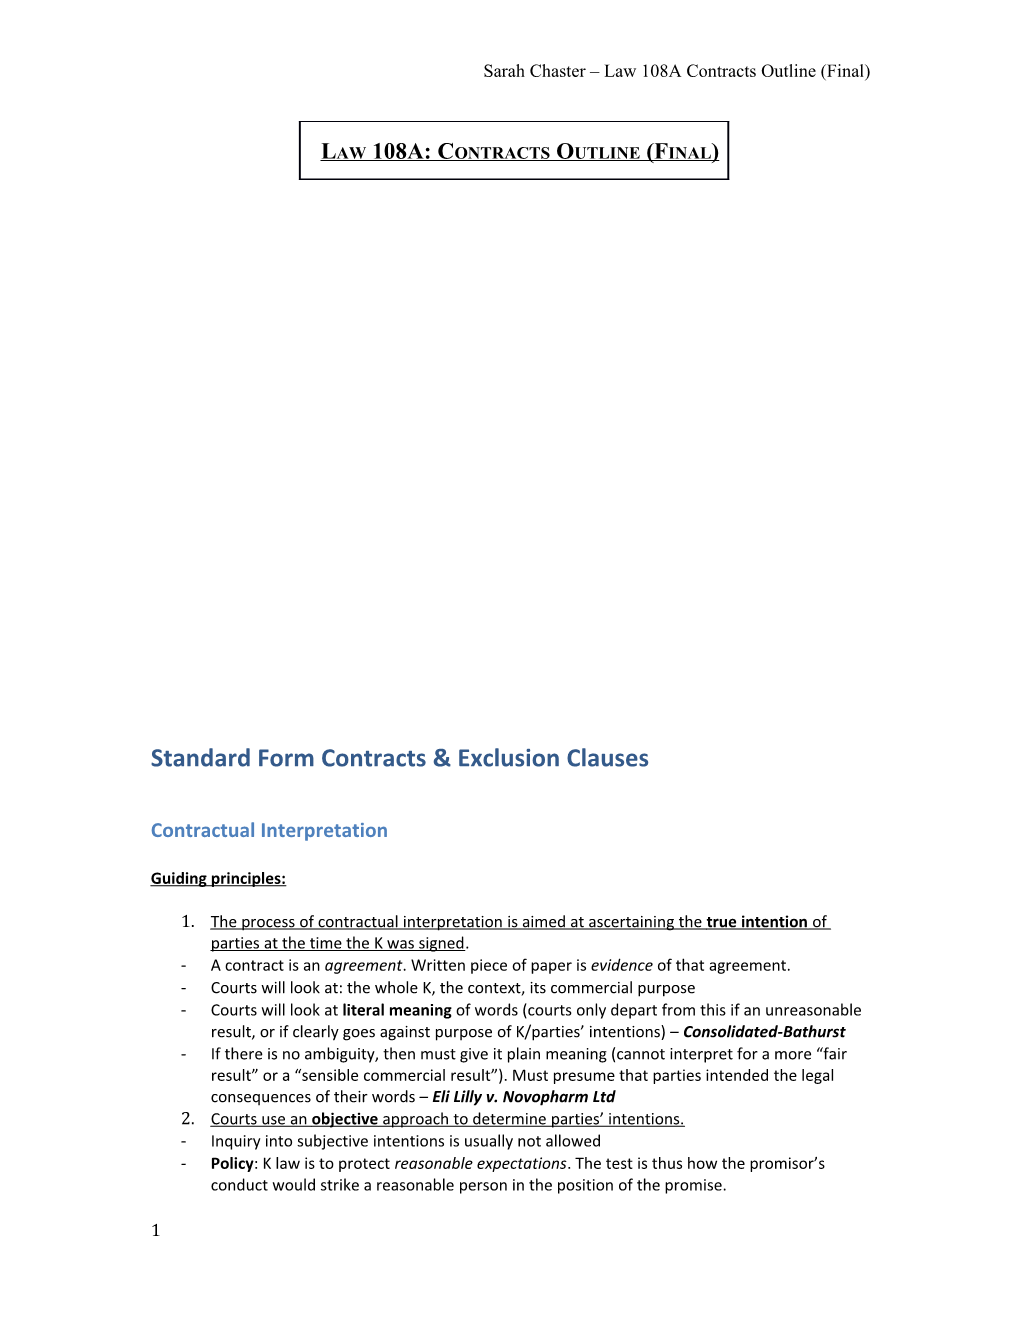 Standard Form Contracts & Exclusion Clauses